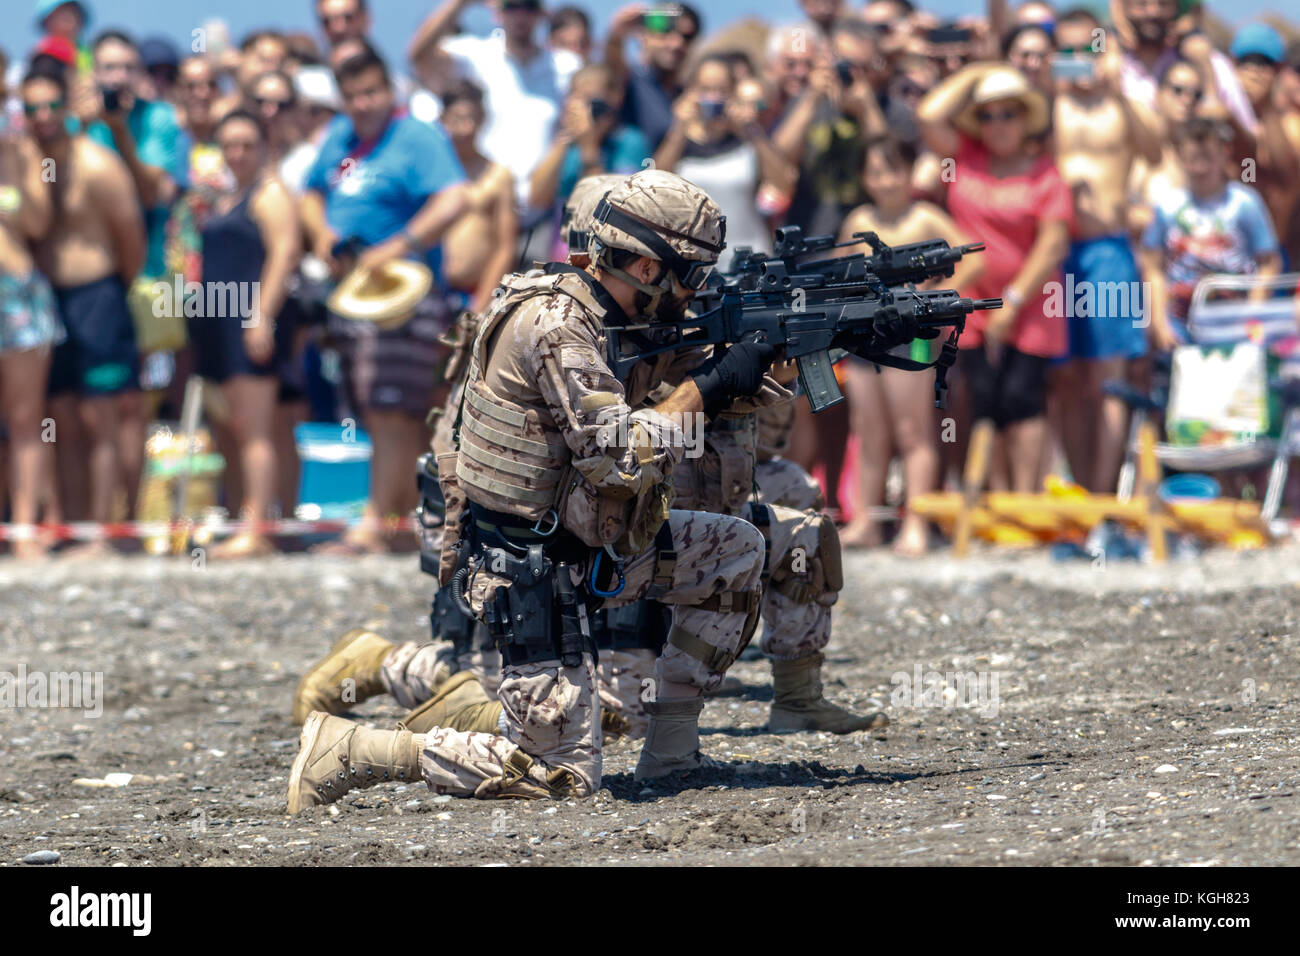 MOTRIL, GRANADA, SPAIN-JUN 11: Spanish Marines taking part in an exhibition on the 12th international airshow of Motril on Jun 11, 2017, in Motril, Gr Stock Photo